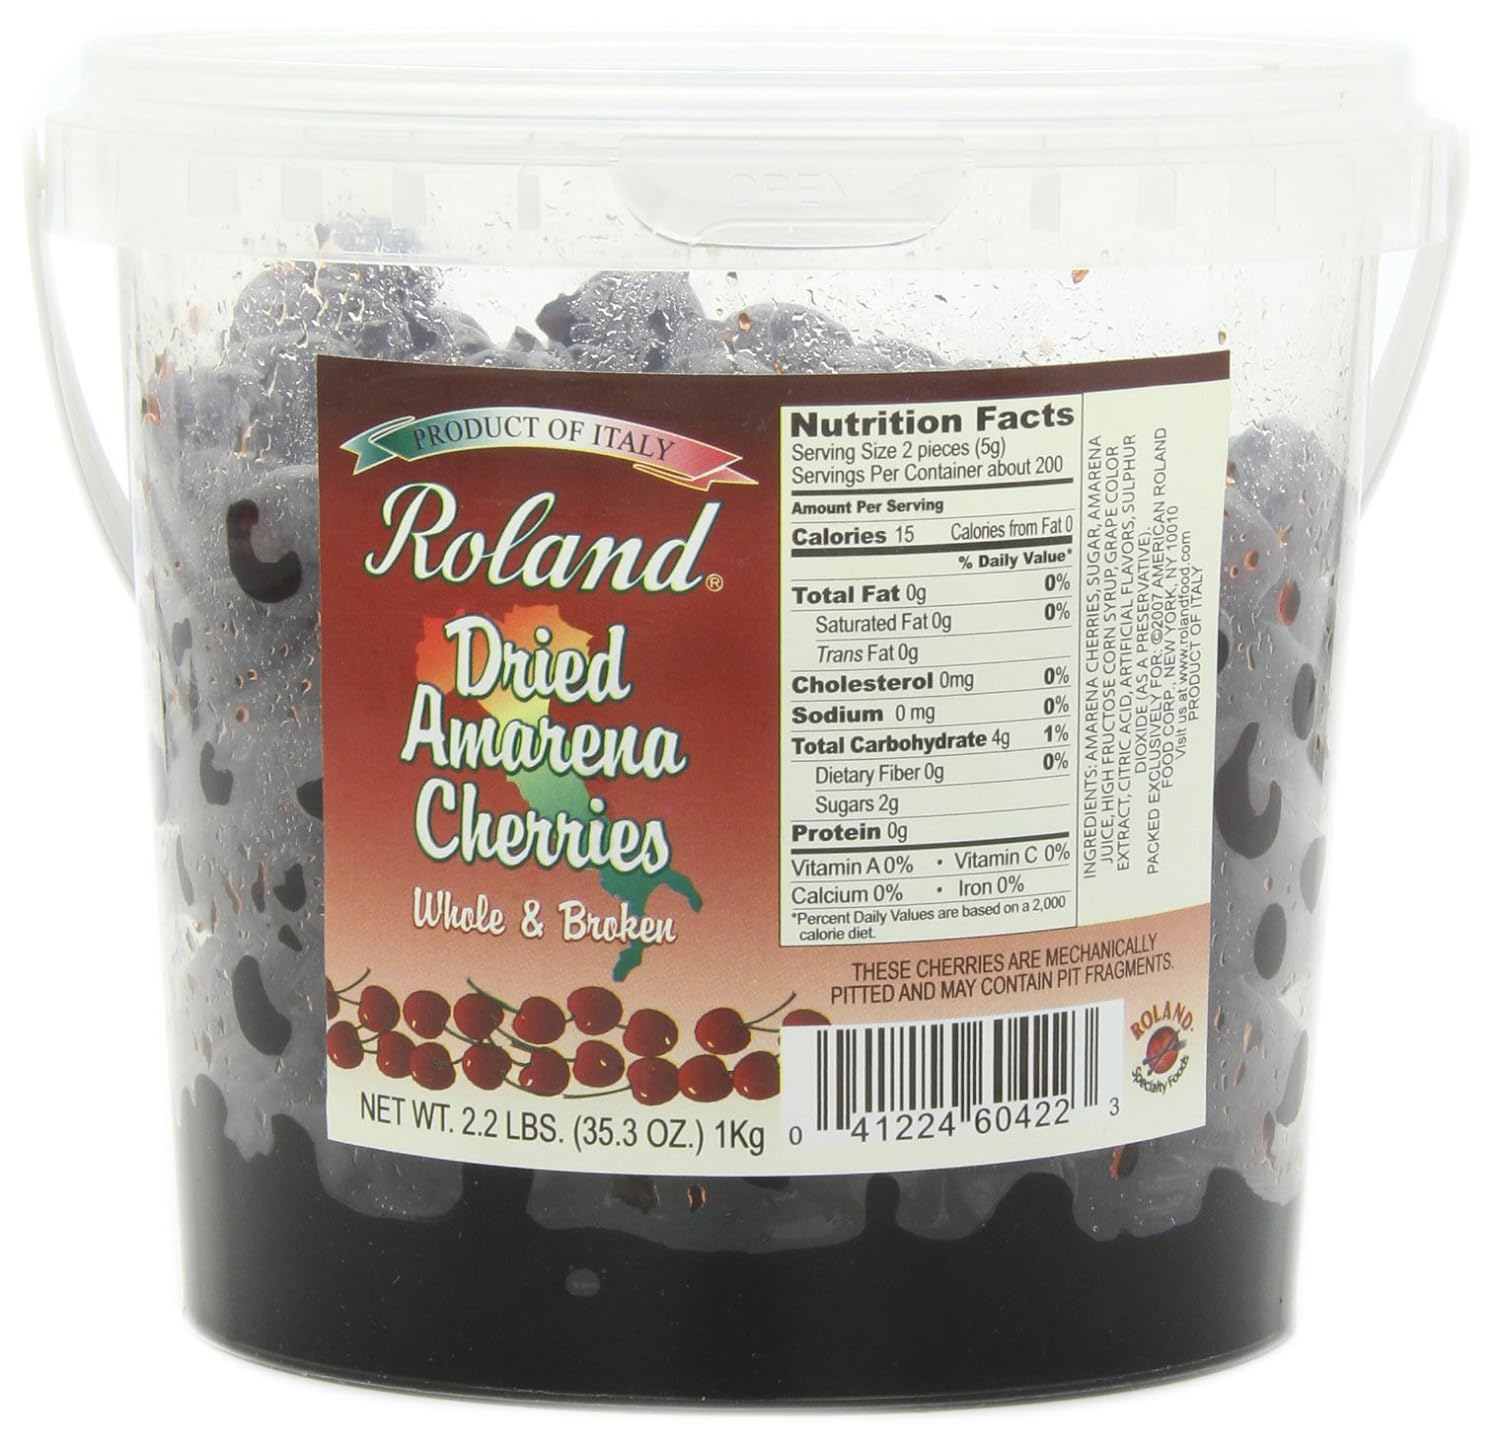 Roland Cherries, Dried Amarena in Syrup, 35.3 Ounce